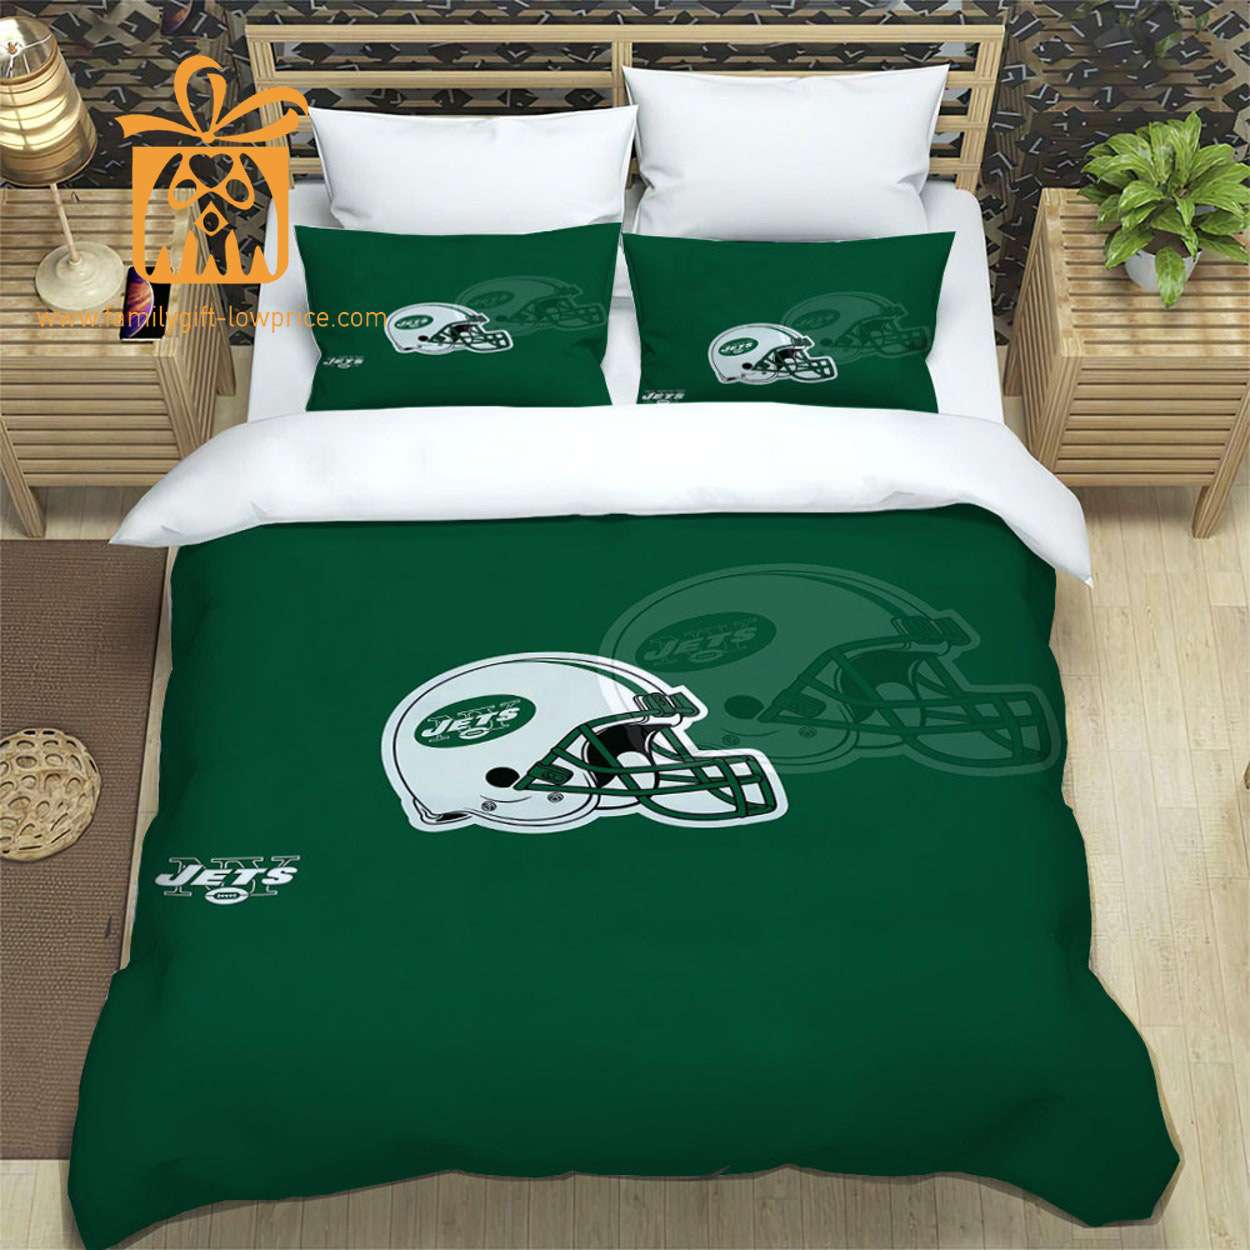 New York Jets Bed Set, Custom Cute Bed Sets with Name & Number, NY Jets Gifts